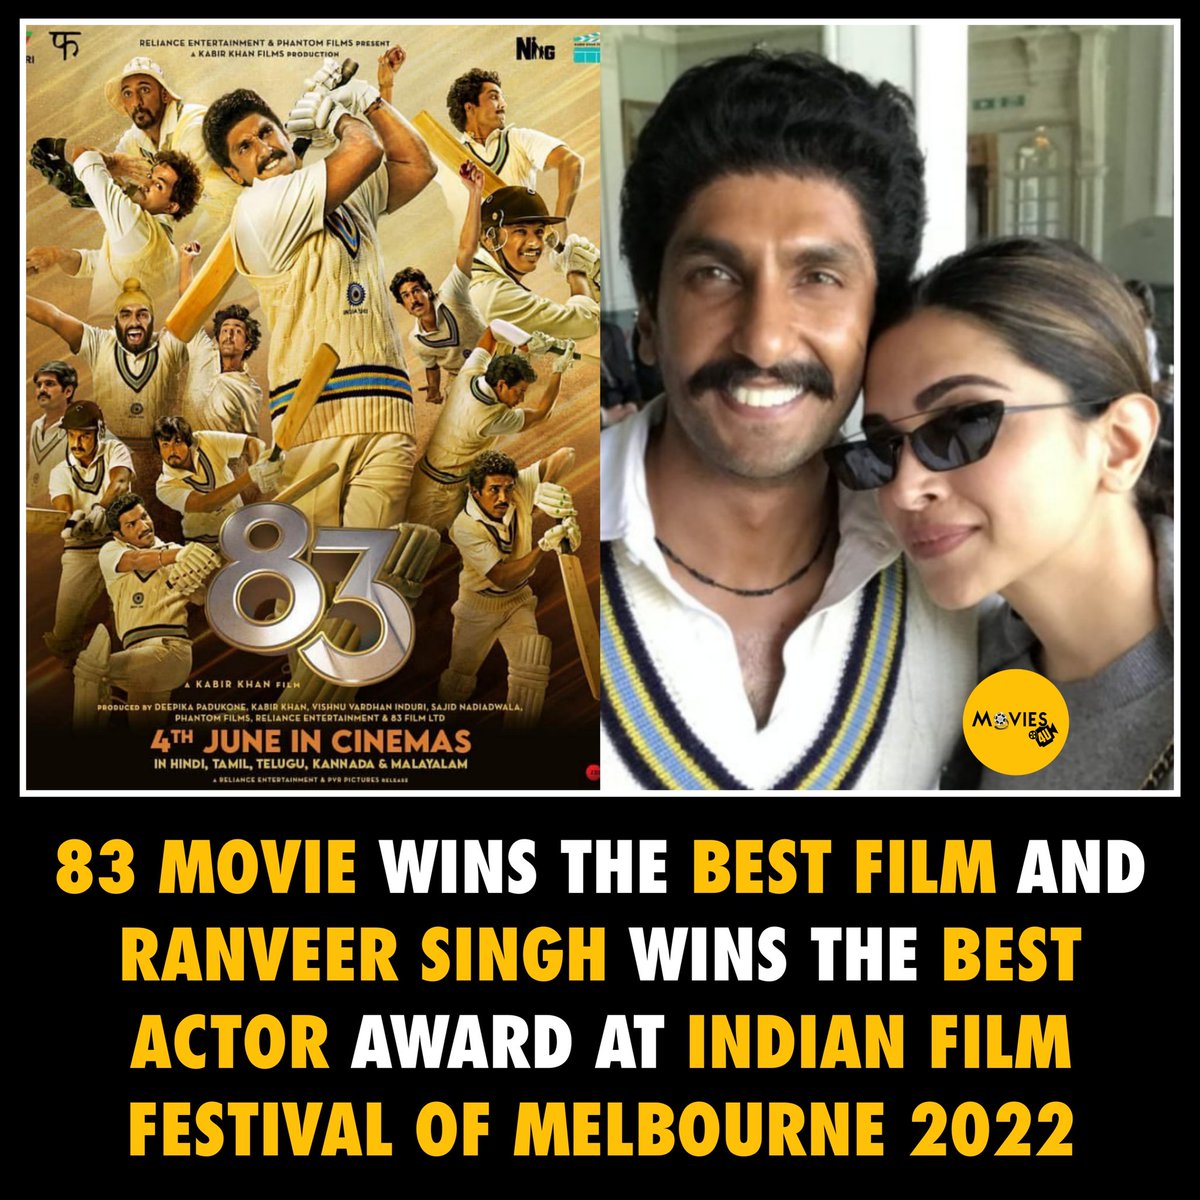 Congratulations 👏 @RanveerOfficial and team #83Movie for winning best actor & best film at the #IndianFilmFestivalOfMelbourne2022